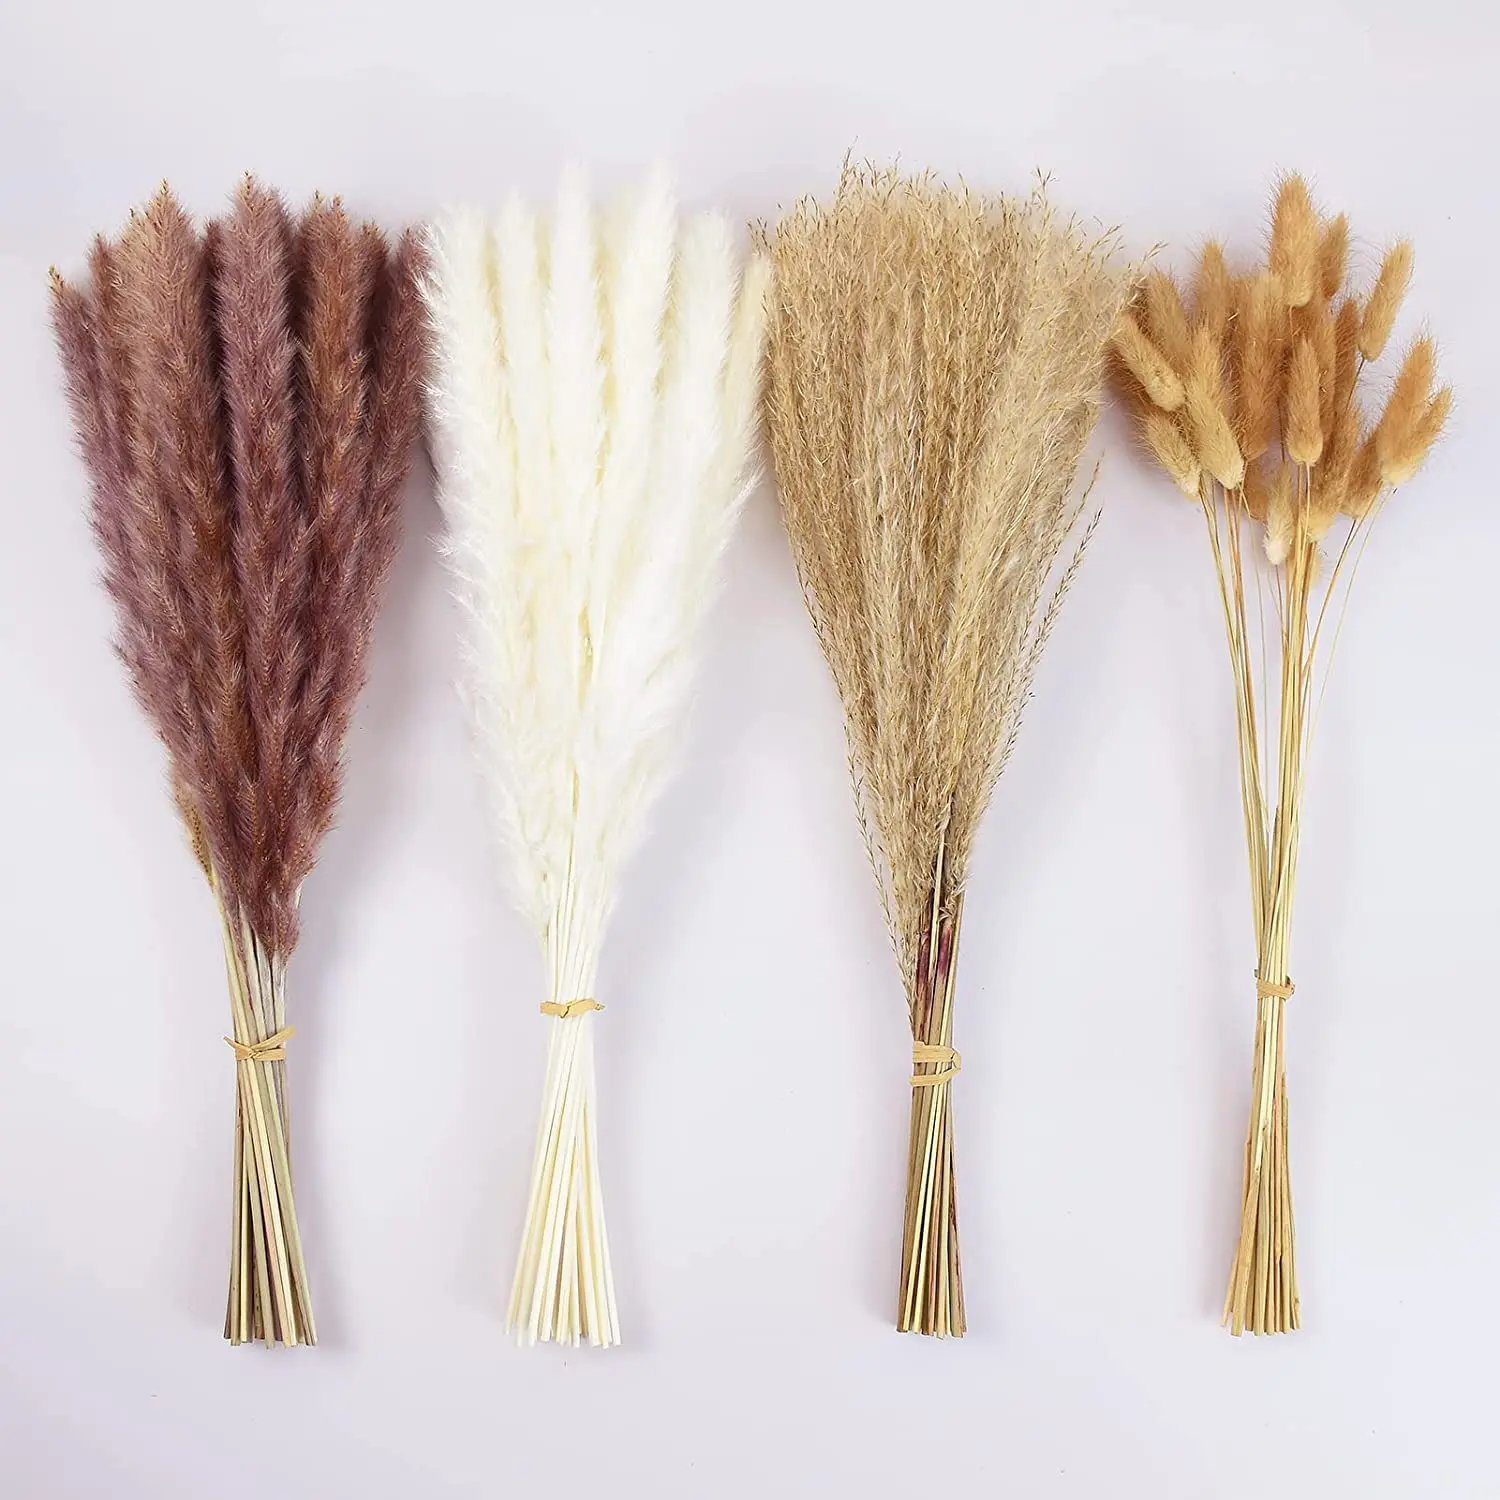 

50/100pcs Pampas Grass for Boho Chic Home Decor and Naturally Dried Flower Bouquet Bunny Tails Reed Grass Phragmites Dekoration